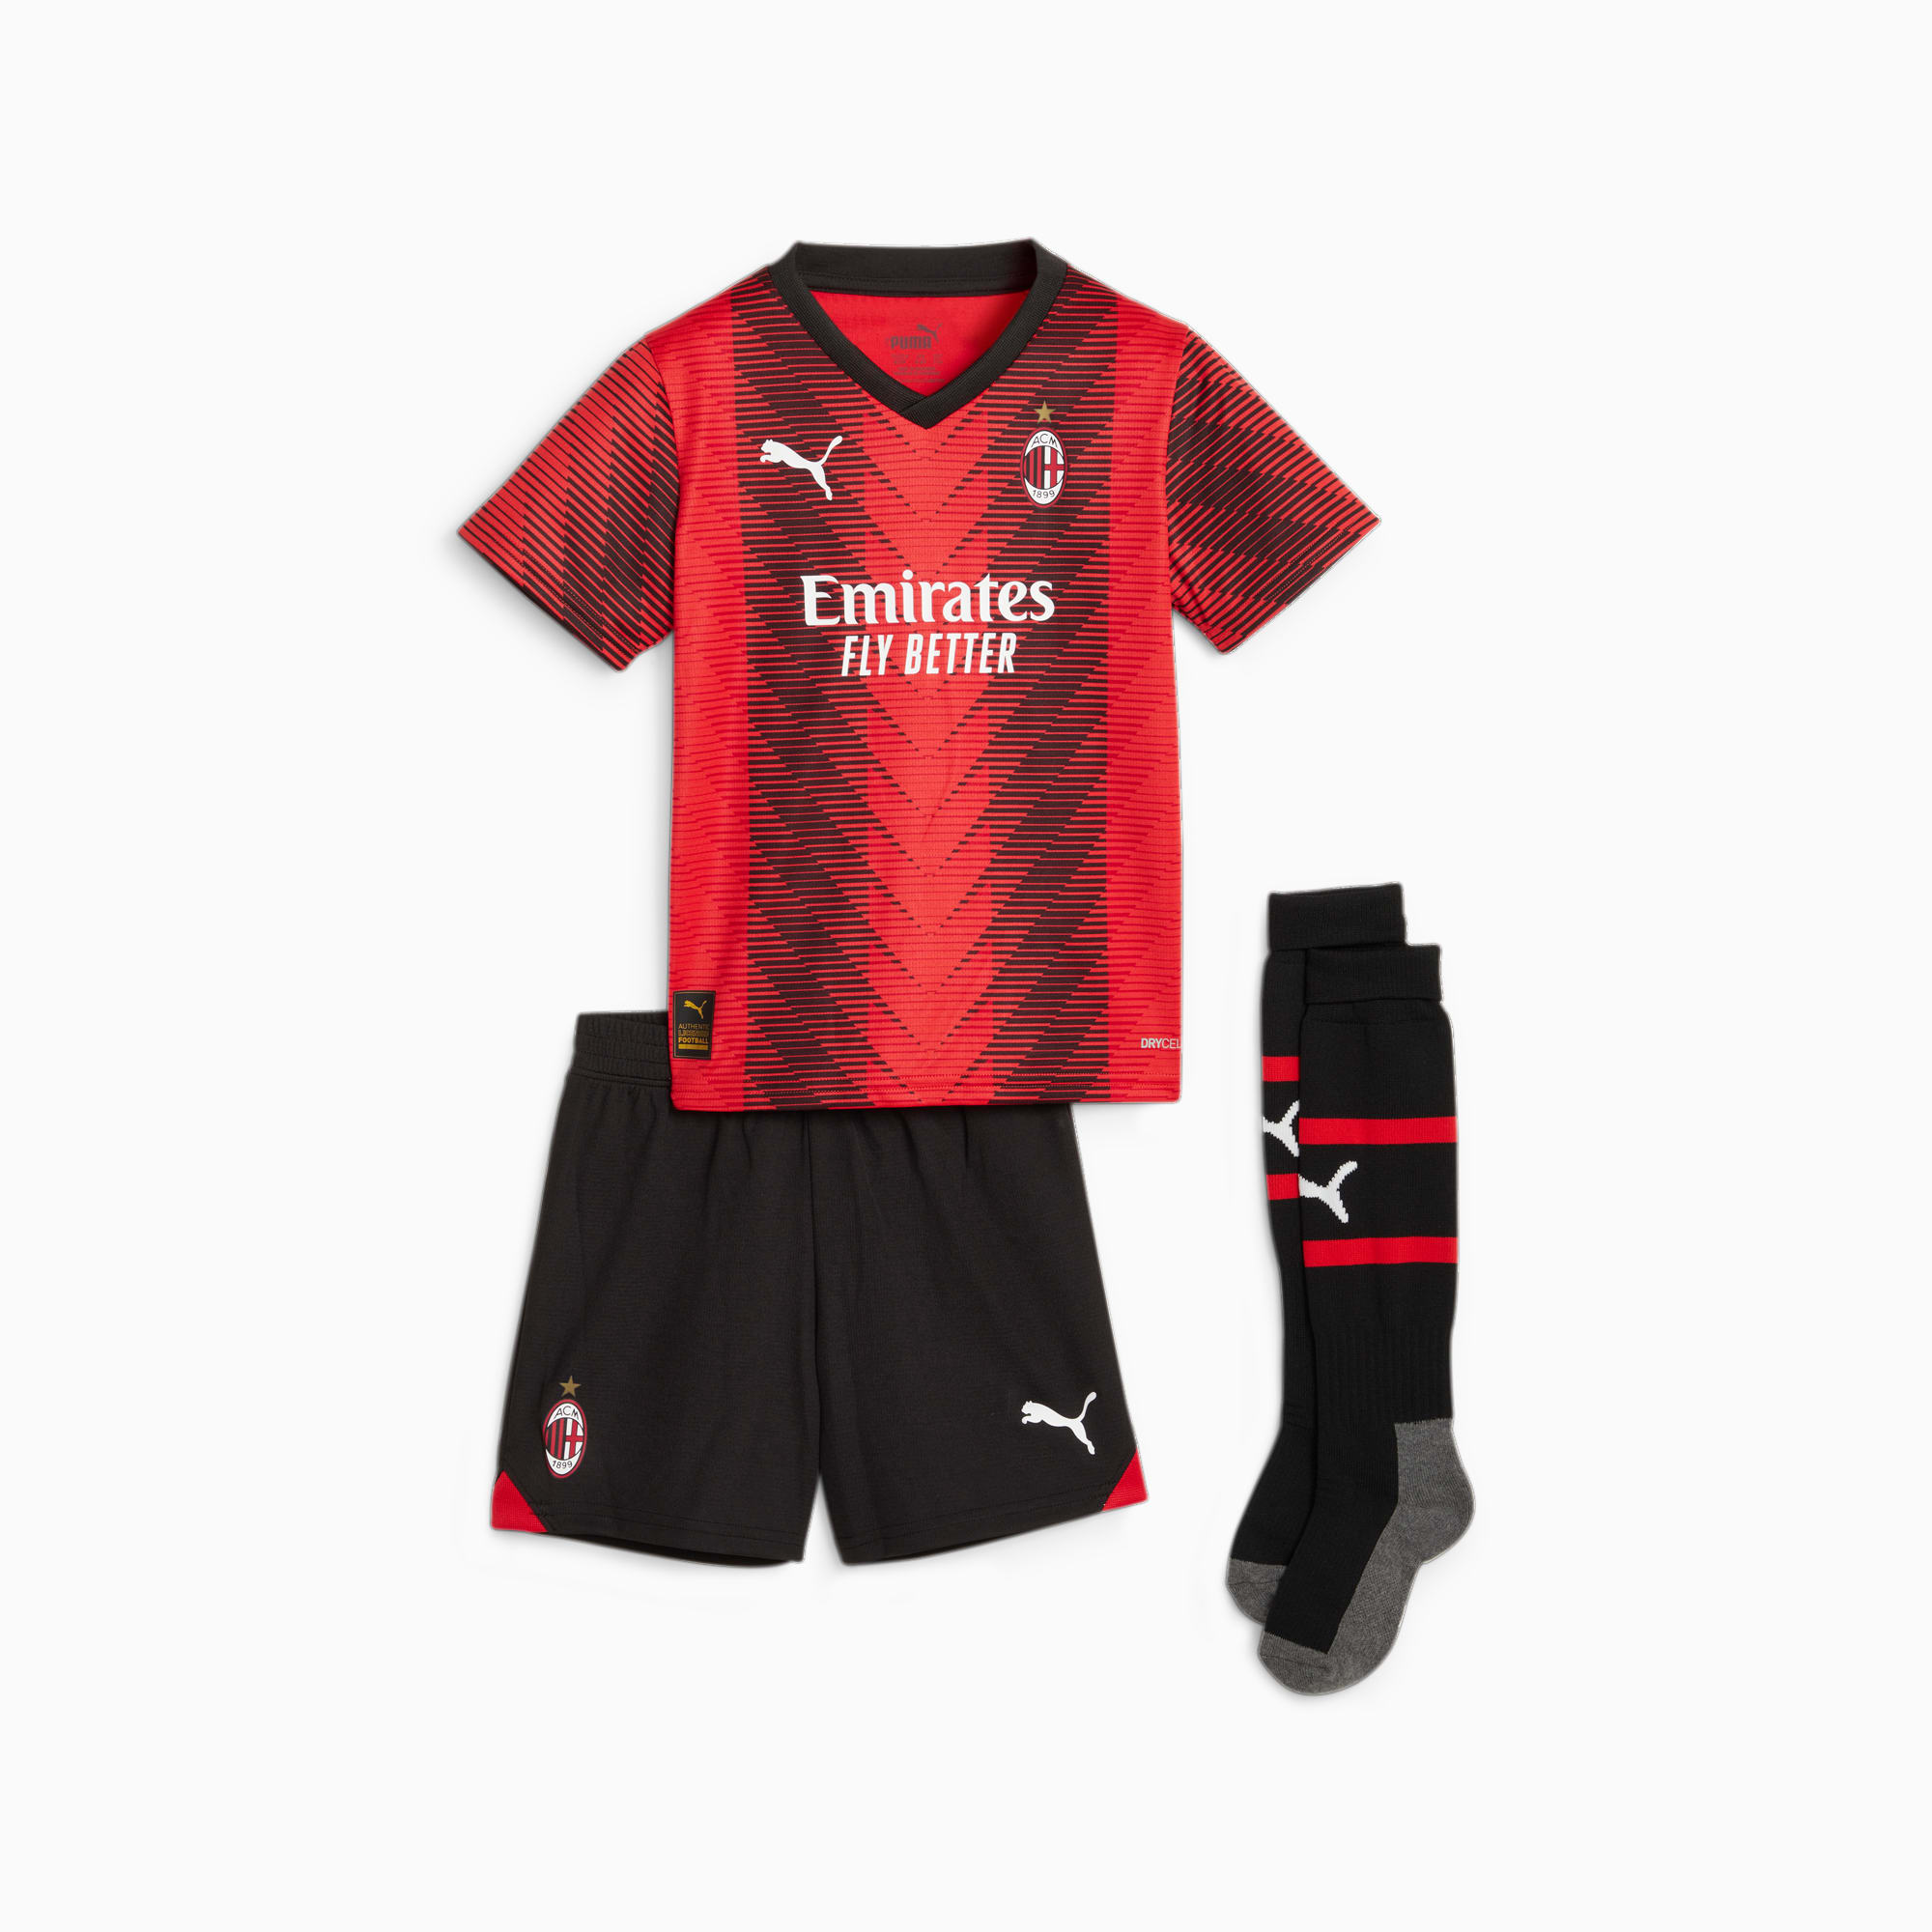 PUMA A.C. Milan 23/24 Home Mini Kit, For All Time Red/Black, Size 110, Clothing